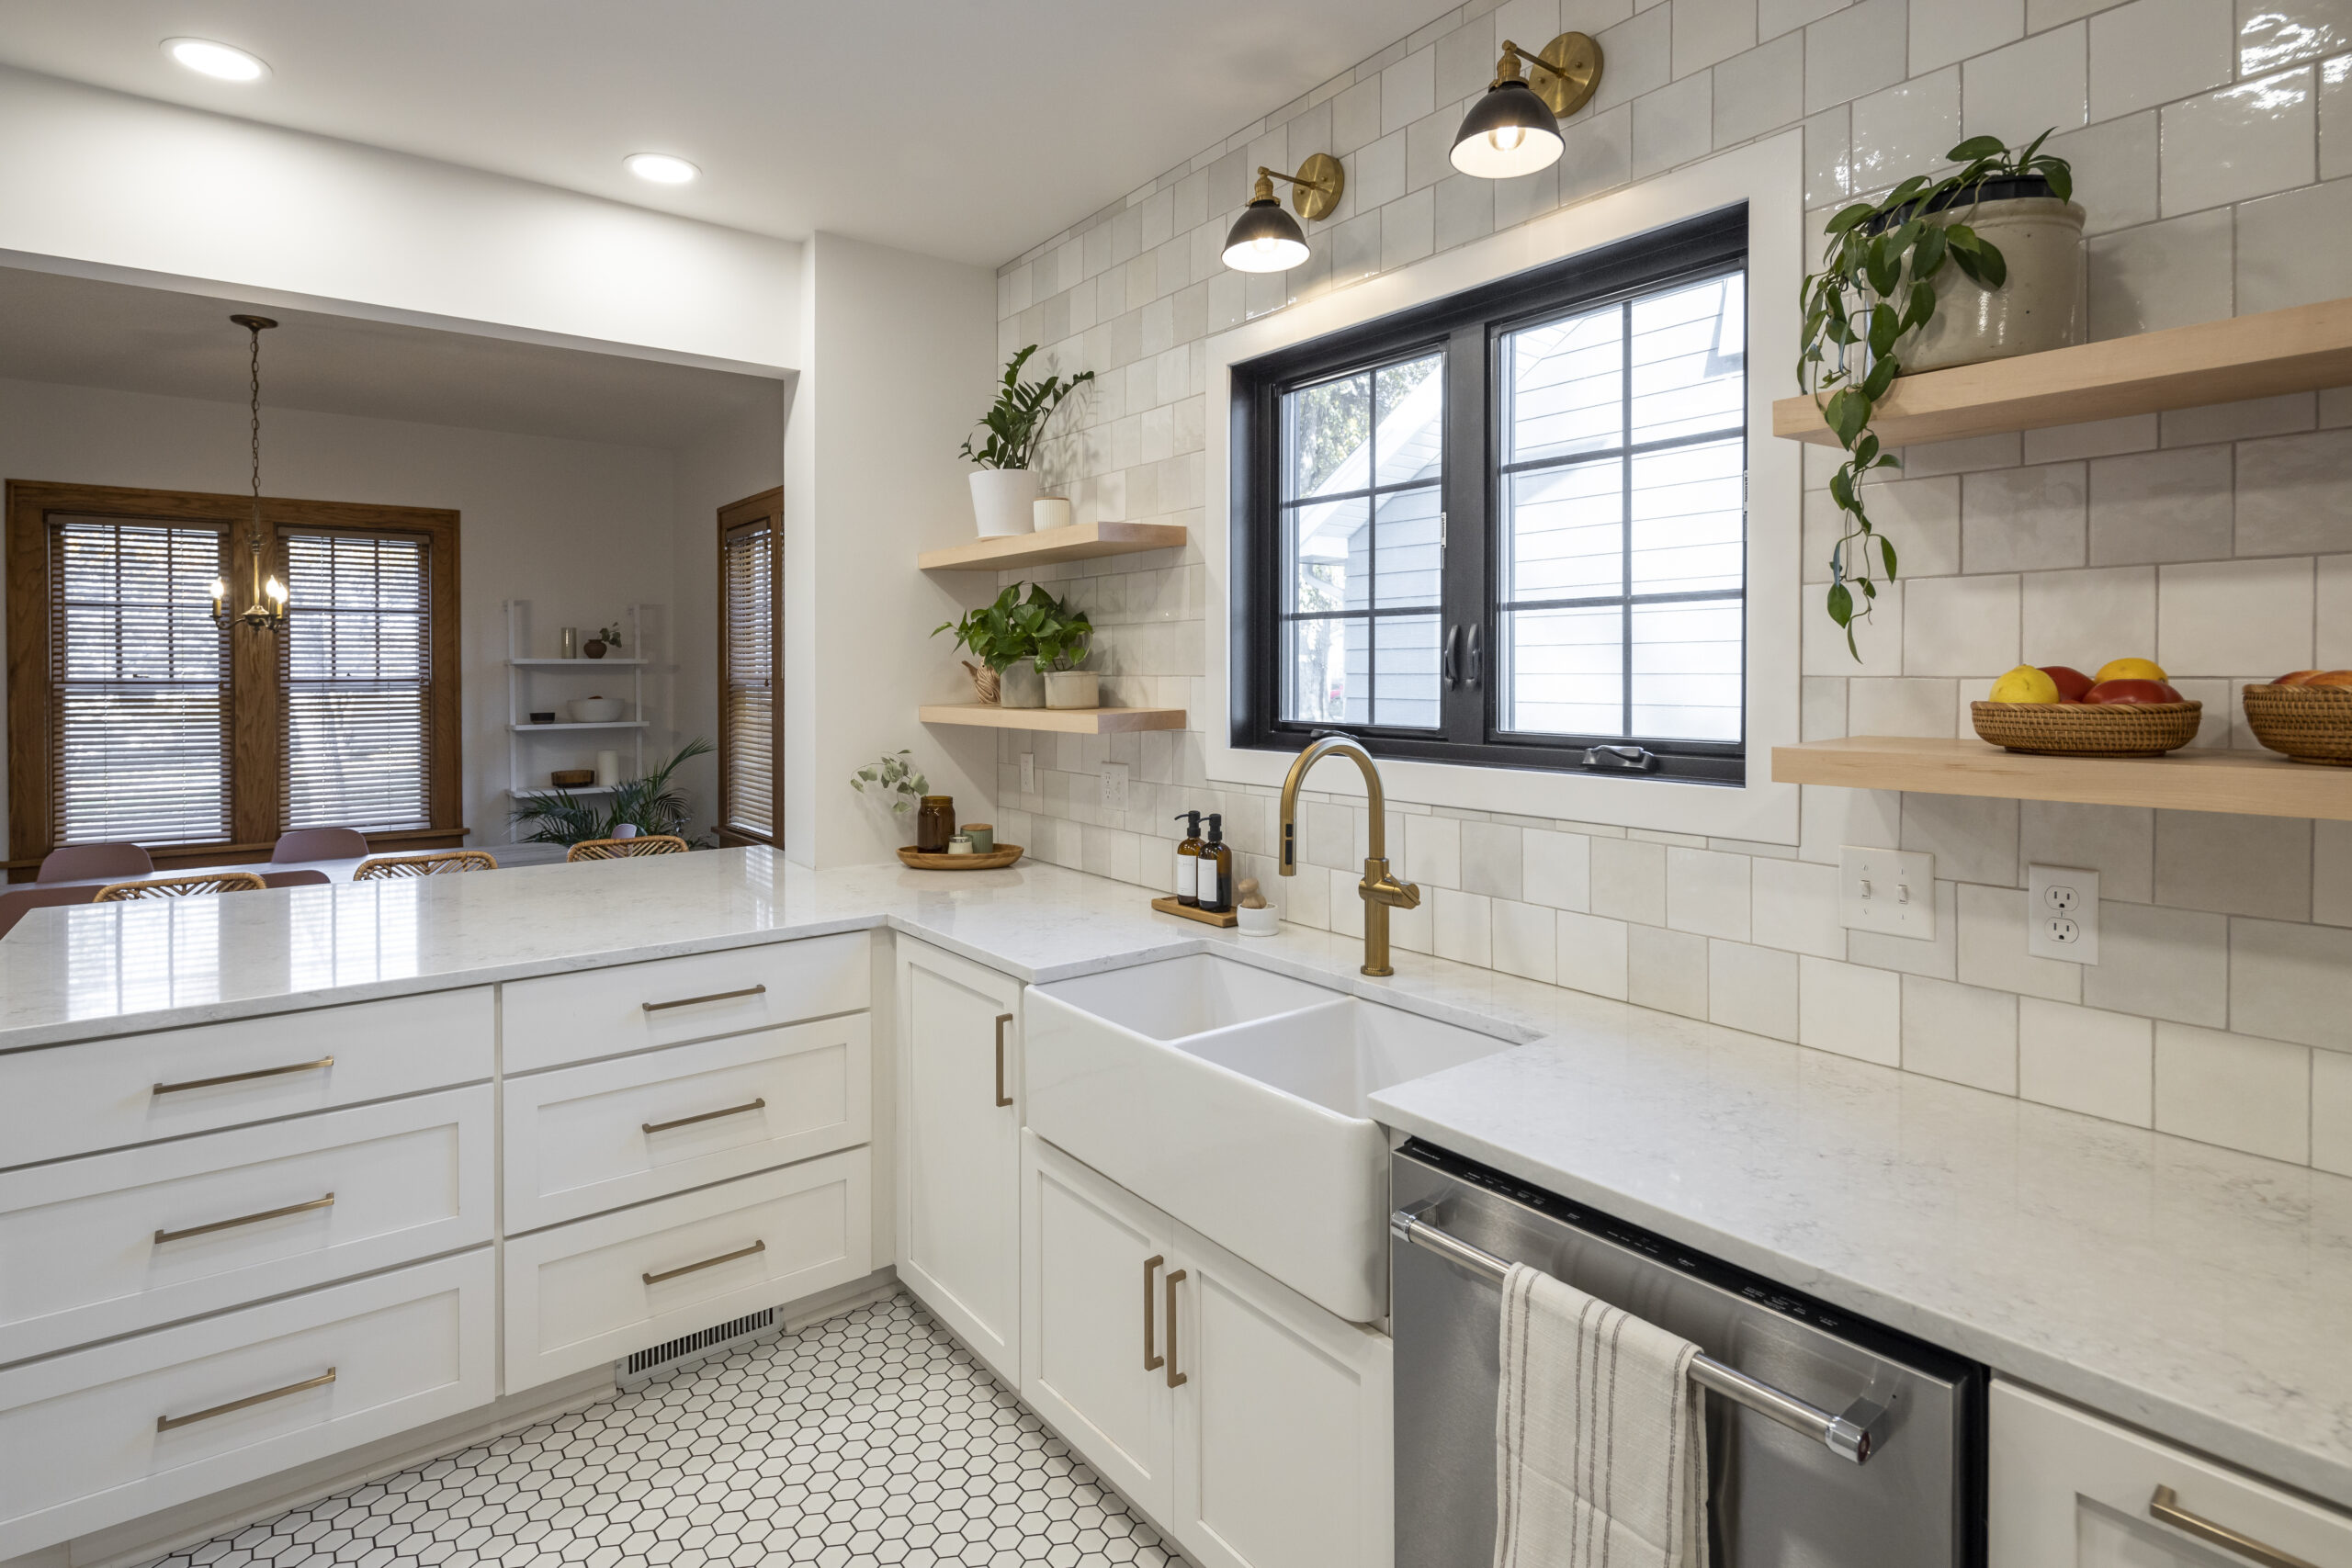 Image of items in a kitchen remodel, including counters, plumbing, cabinets, and lighting